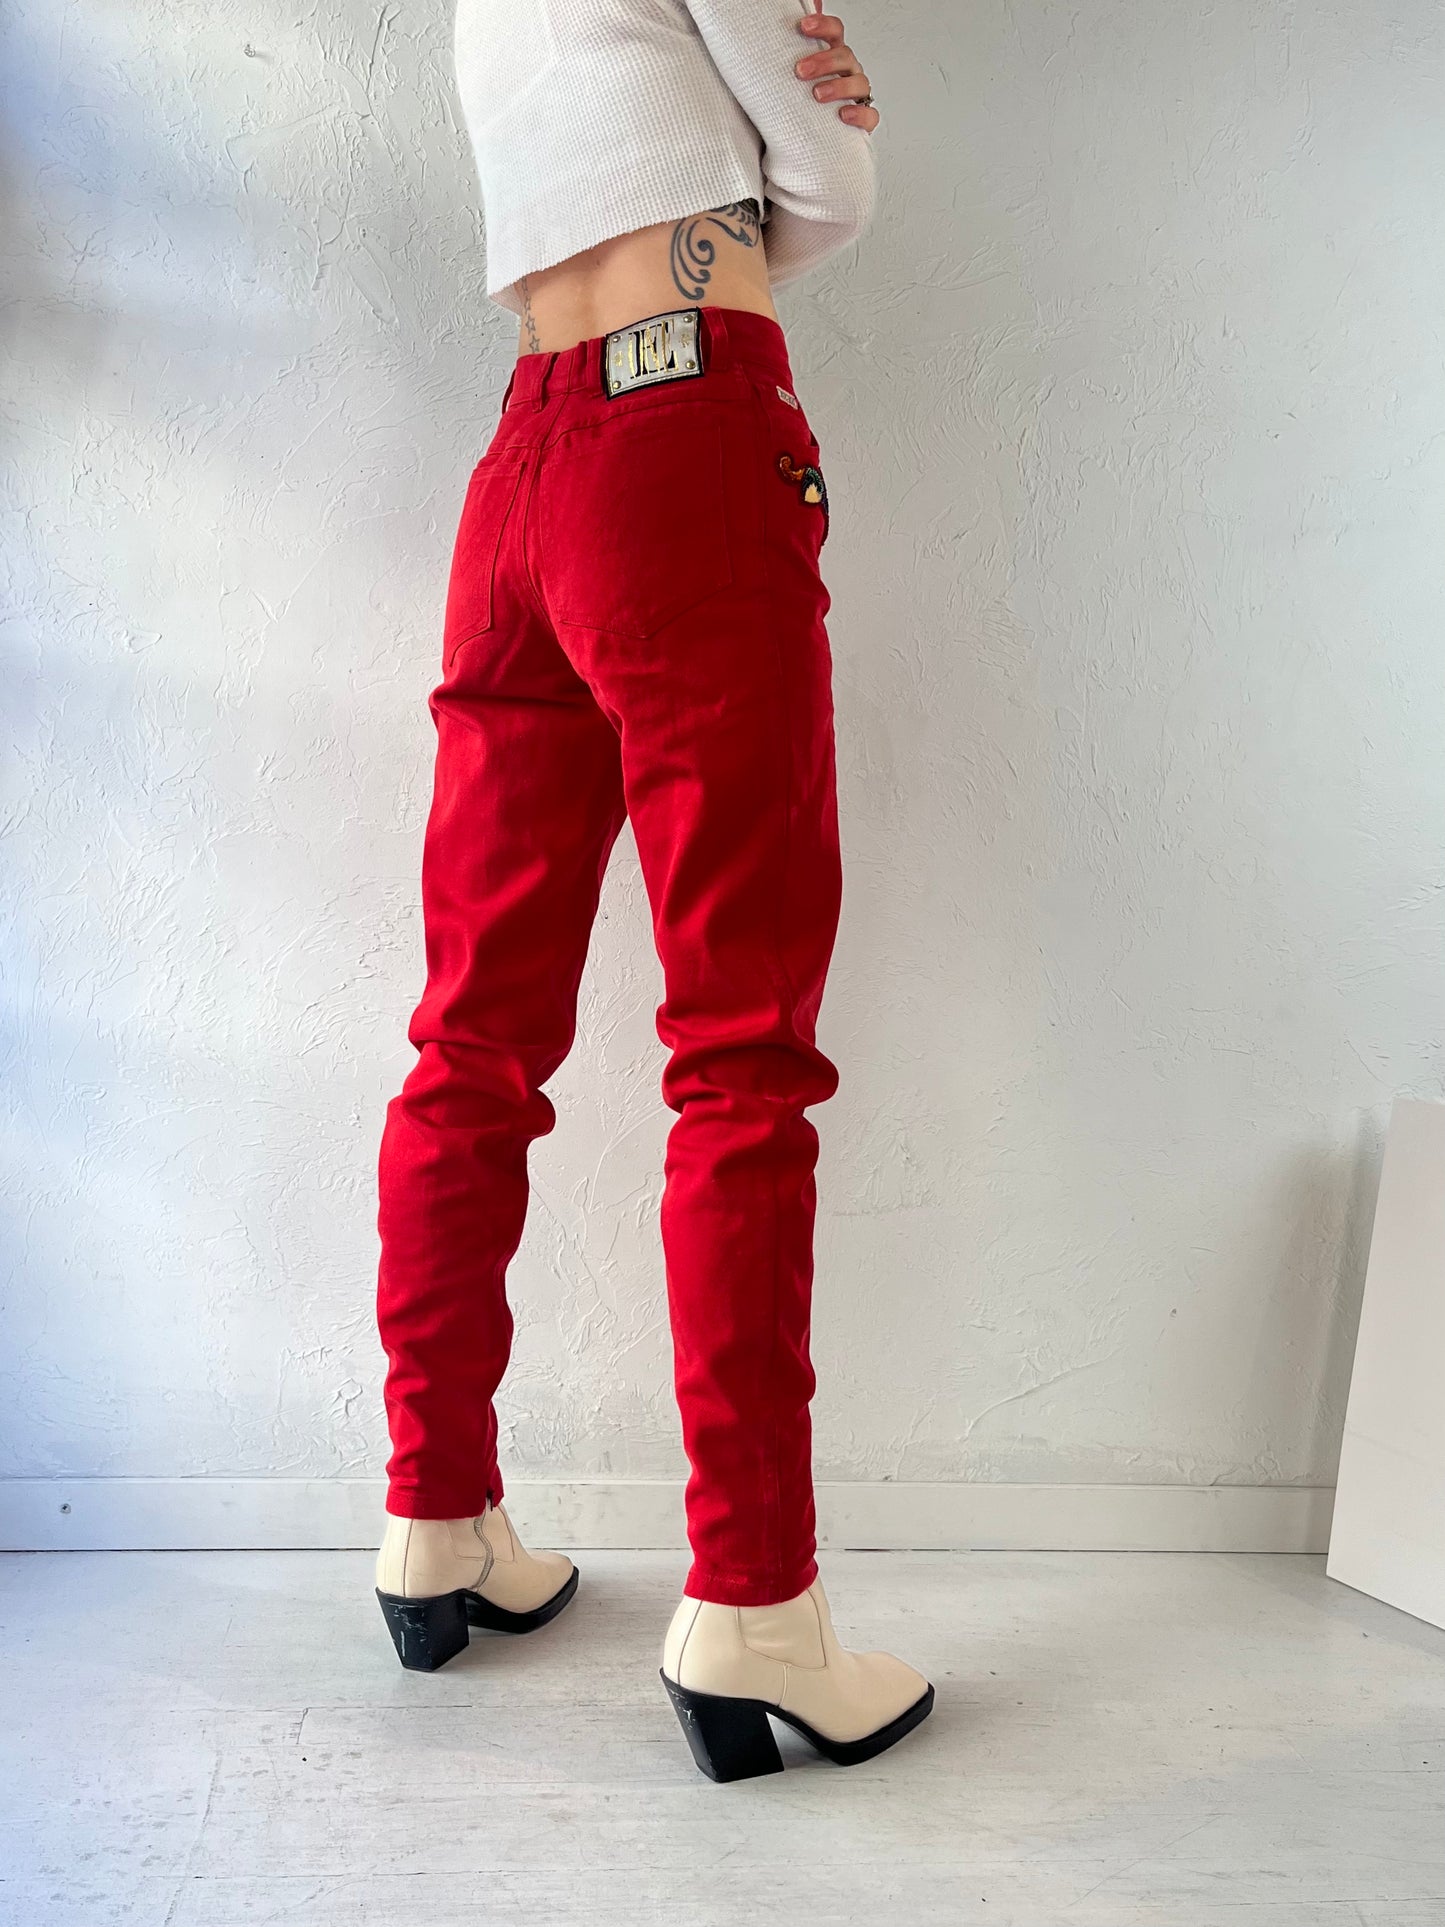 90s 'Escada' Red Beaded Jeans / Small